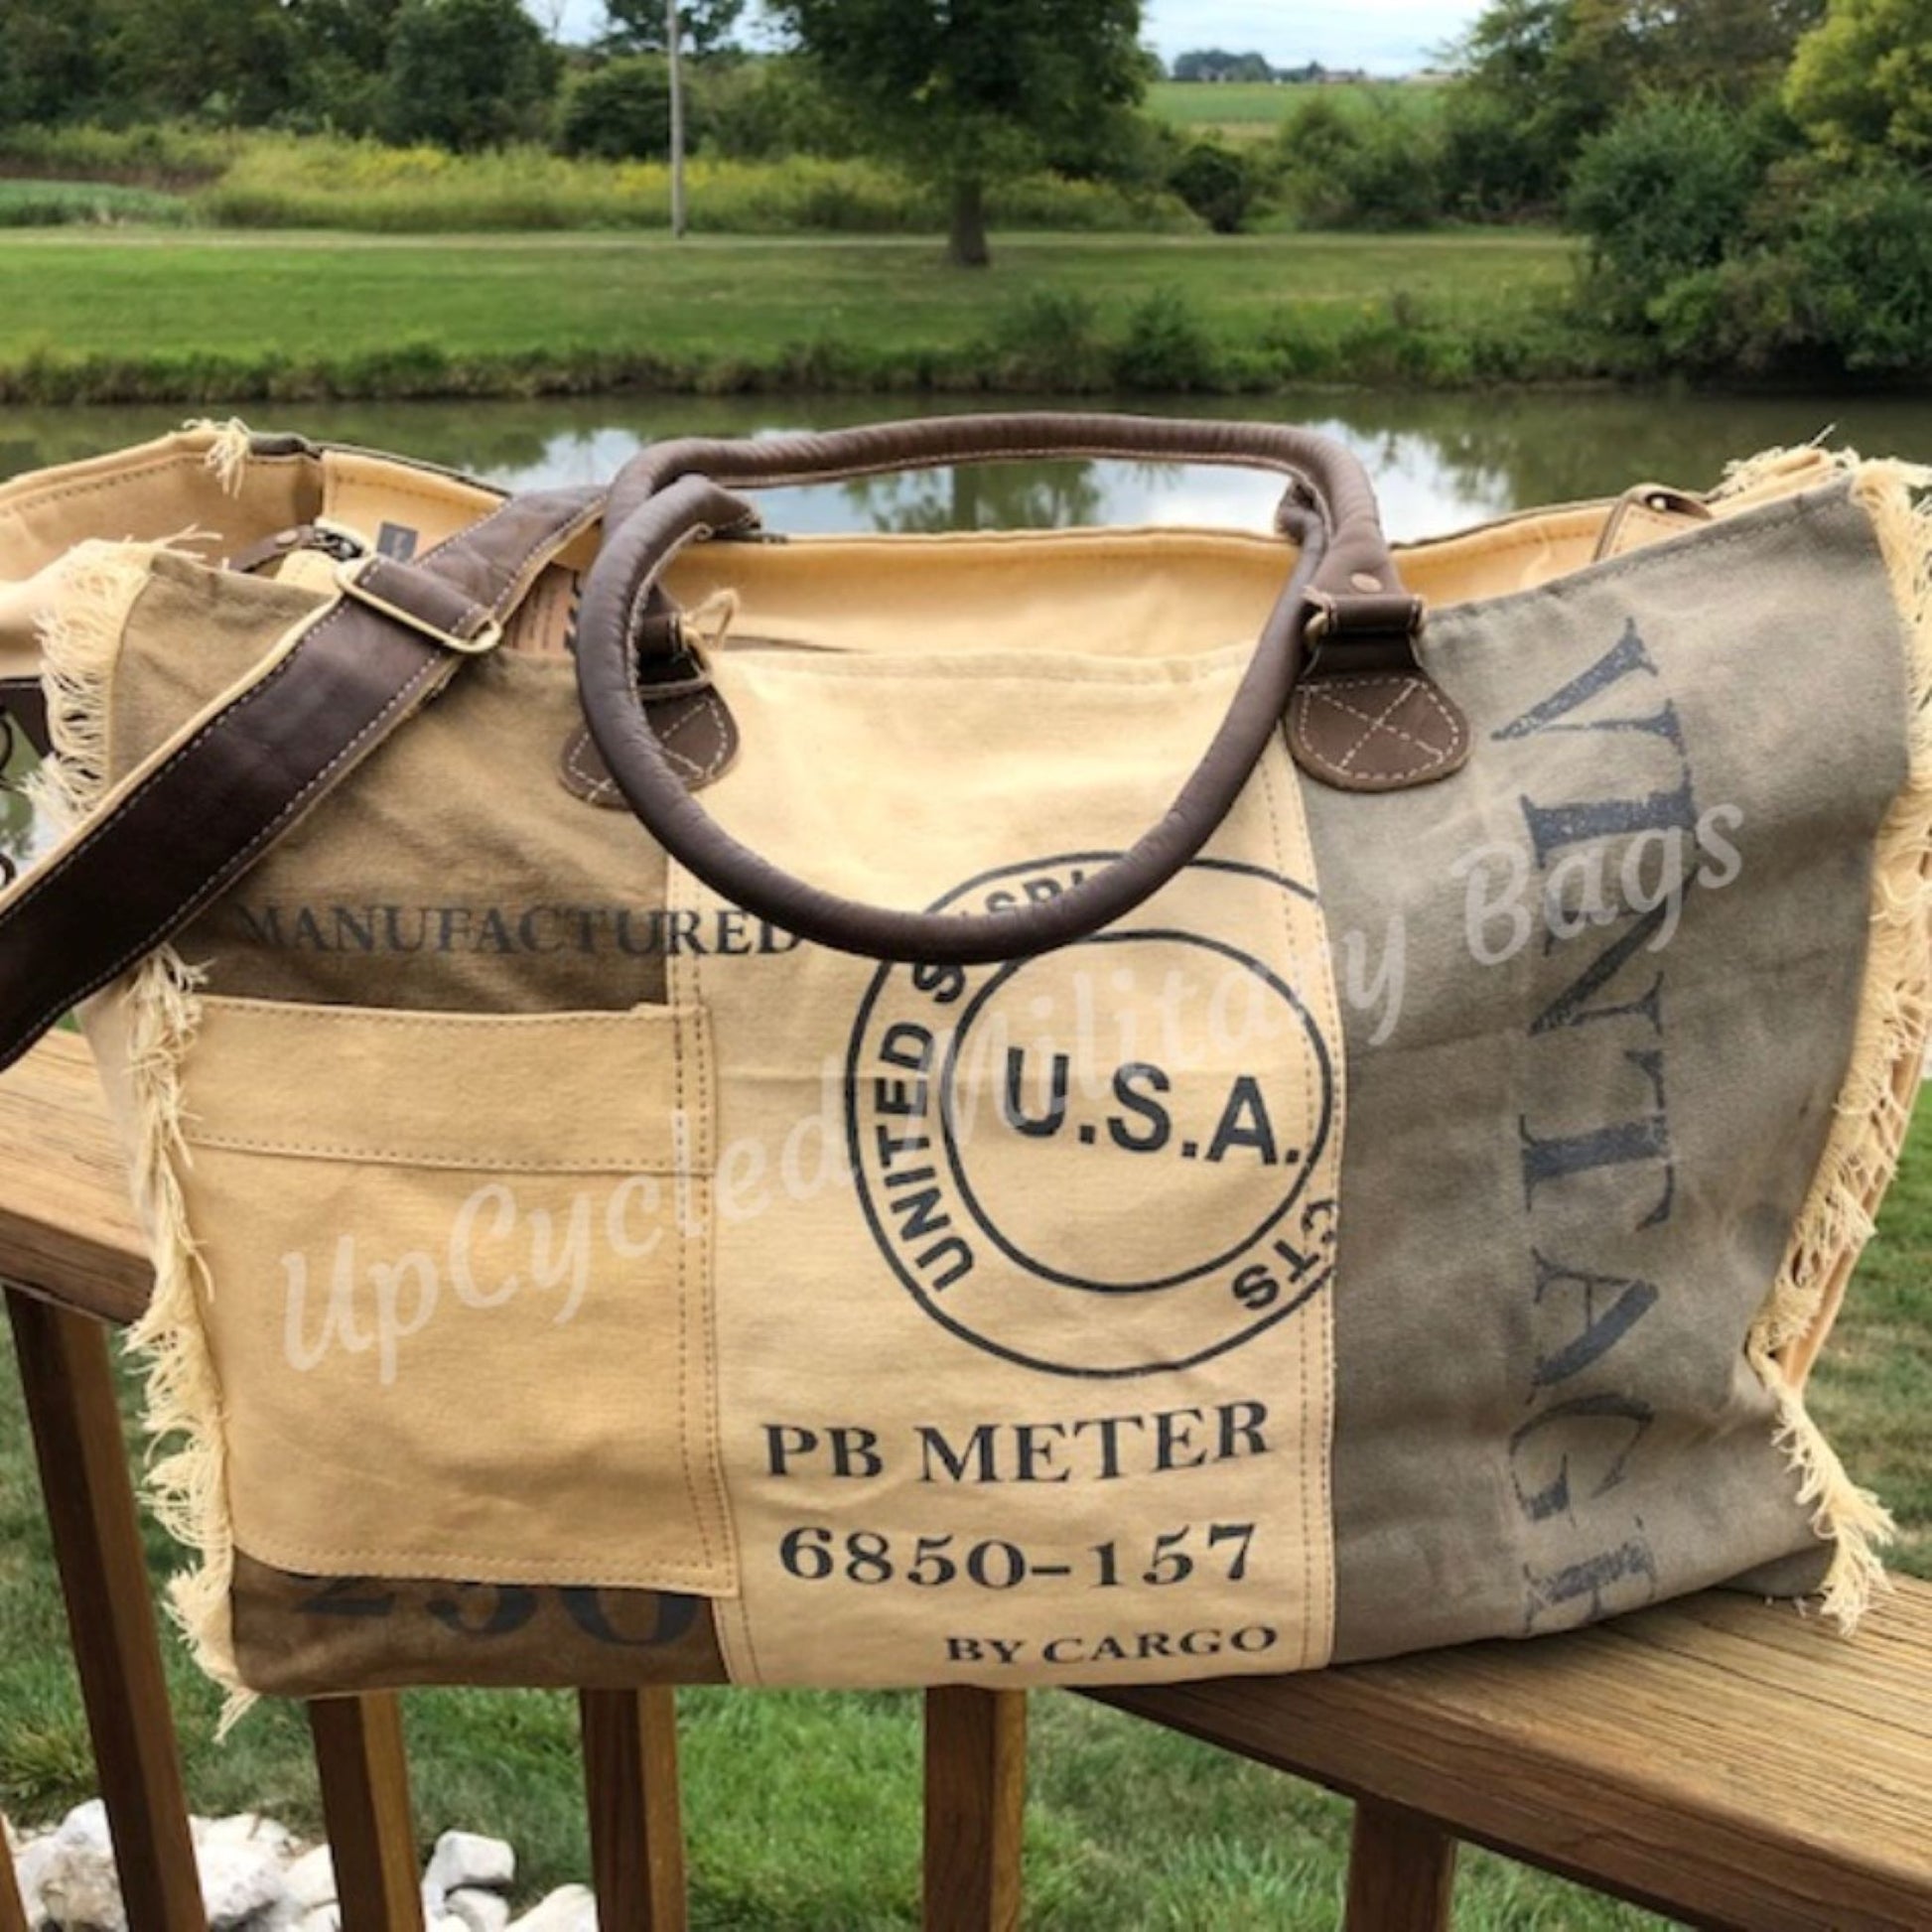 The UpCycled USA Weekender offers everything you need! Made of repurposed (recycled) military tent and tarp canvas. Tote is strong, sturdy and has both shoulder straps and a an adjustable crossbody strap. Dimensions: 17" x 14.5" x 8" (Please note Size). Features: Zip Top Closure, Shoulder Straps, Adjustable Crossbody Strap, Outside Side Pocket, Back Zip Pocket, Inside Zip Pocket, 2 Inside Pockets.